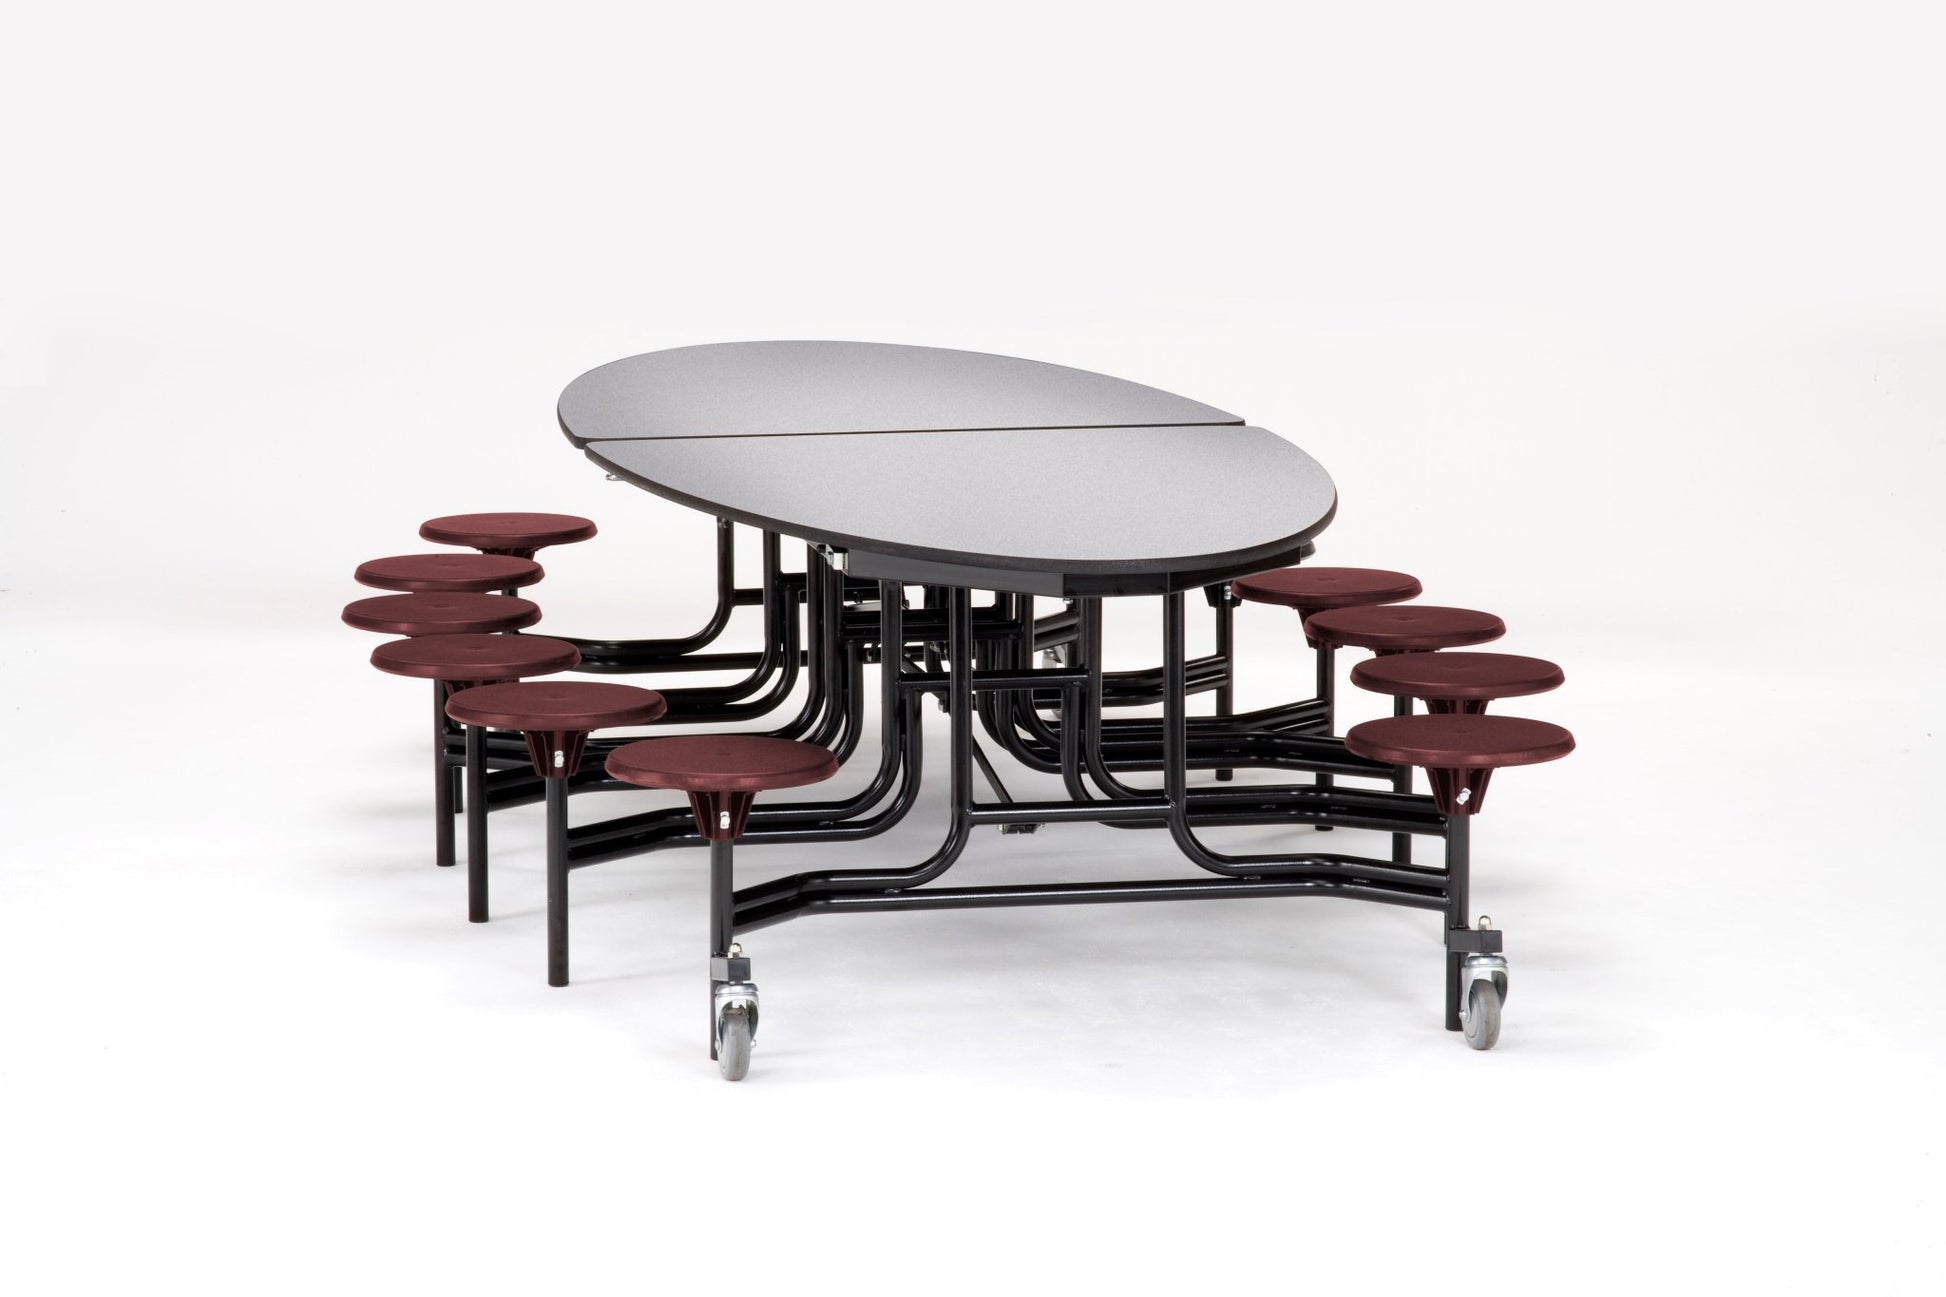 NPS 10' Elliptical Mobile Cafeteria Table - 12 Stools - Plywood Core - Protect Edge - Black Powdercoated Frame - SchoolOutlet